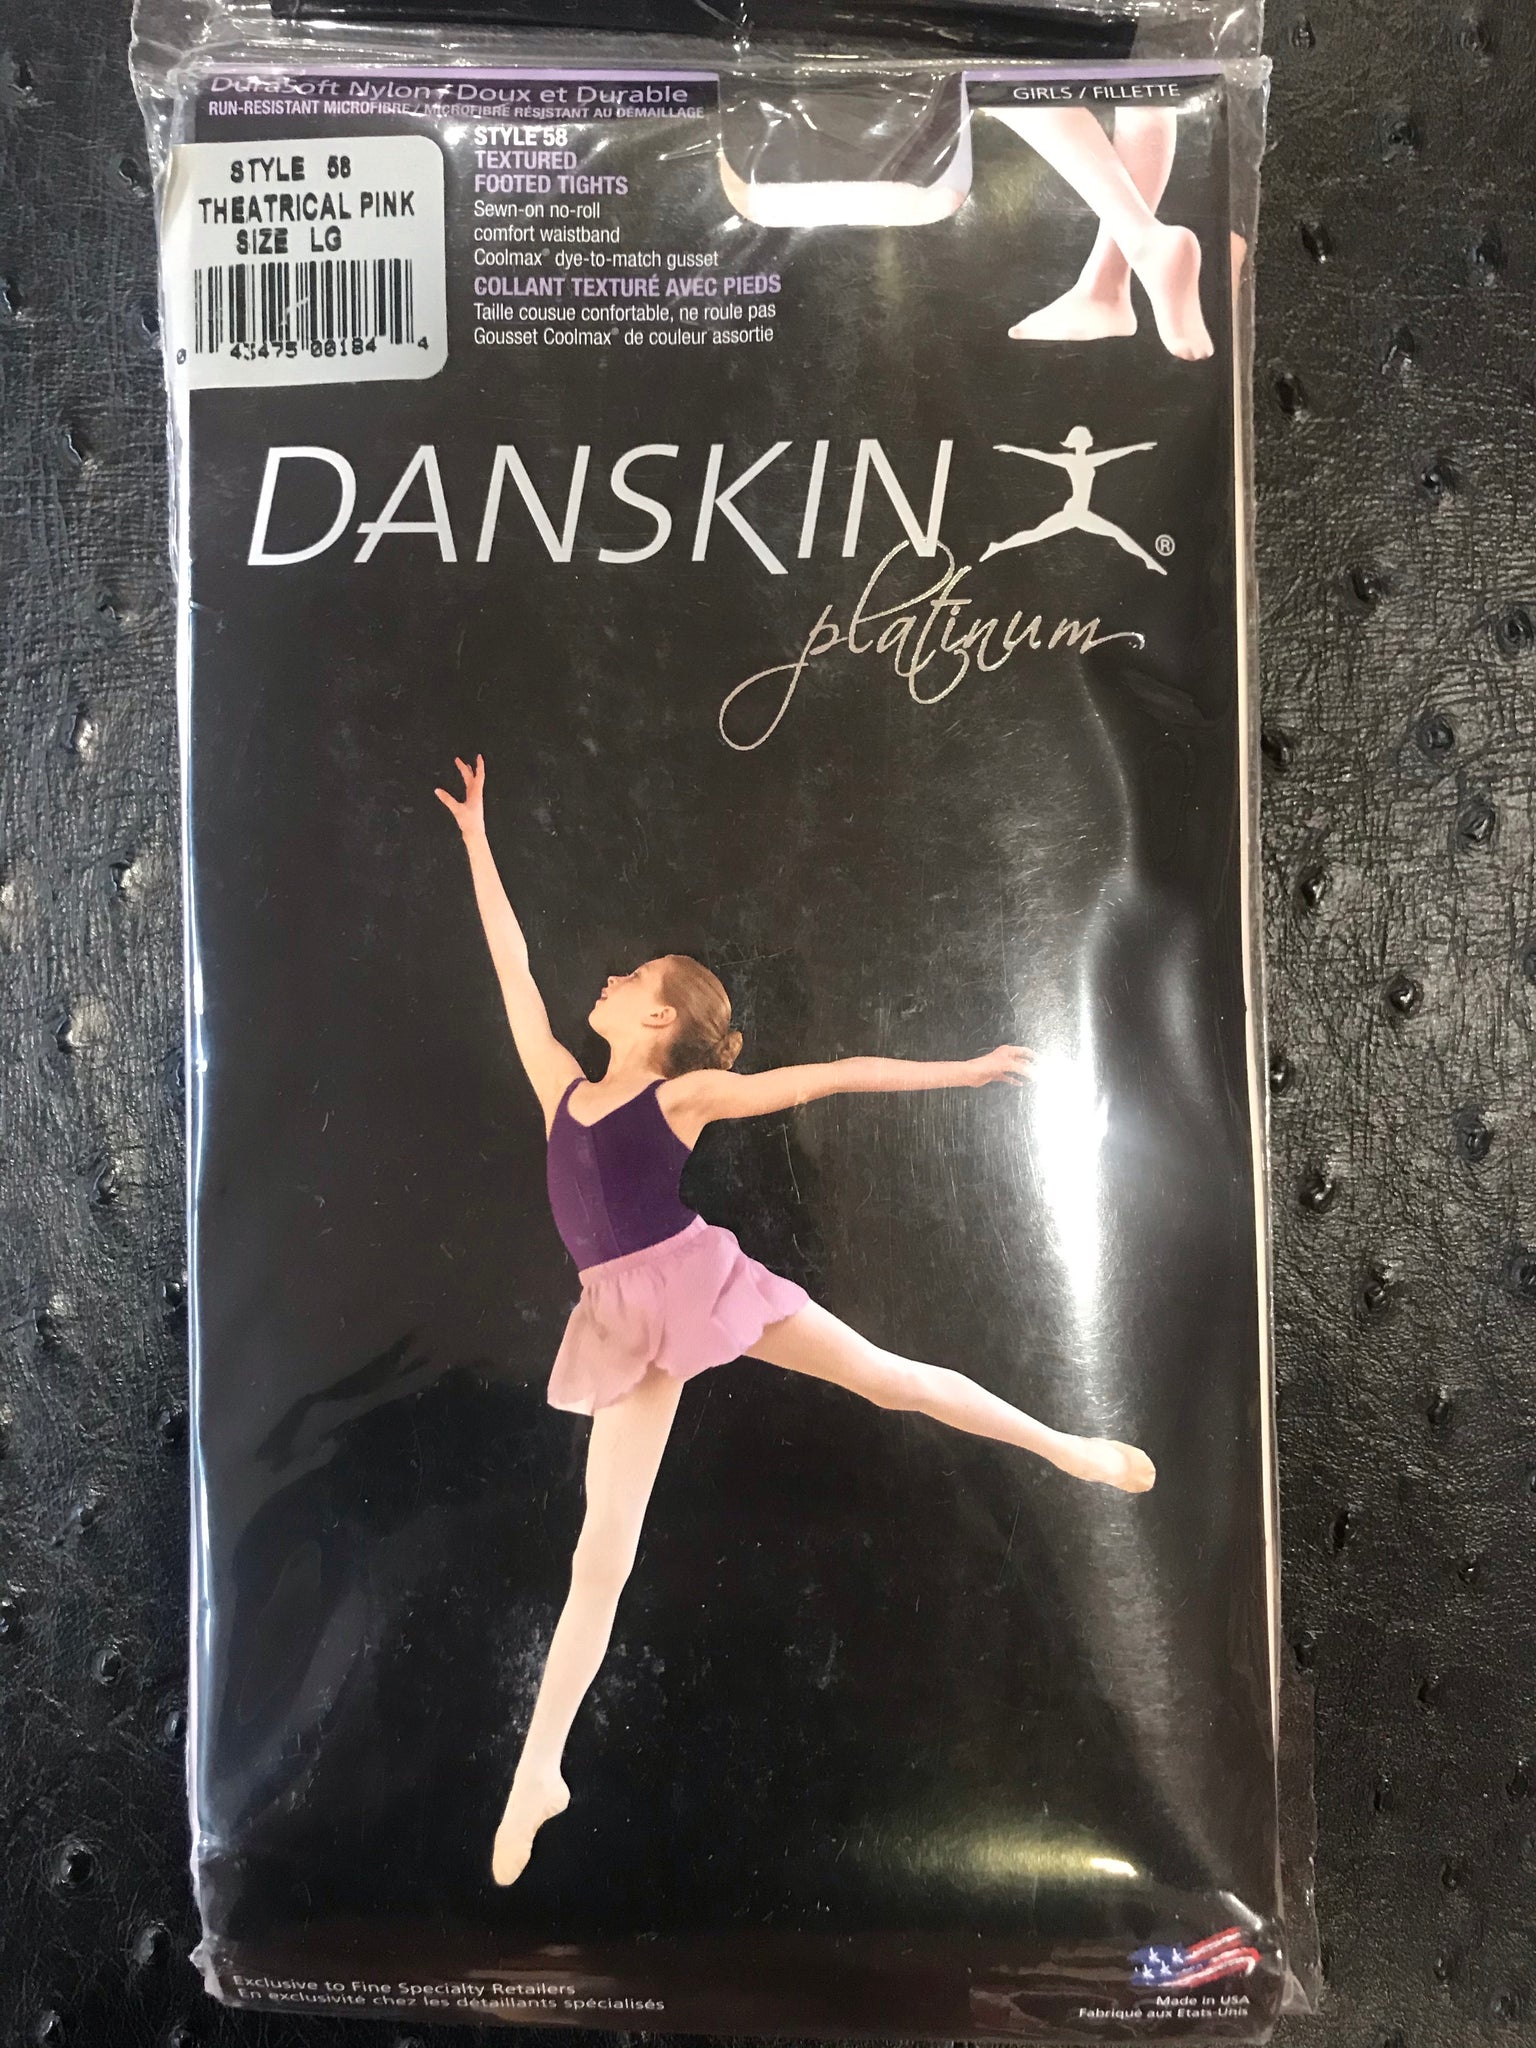 Danskin Footed Tights - Child Sizes Theatrical Pink – Classic